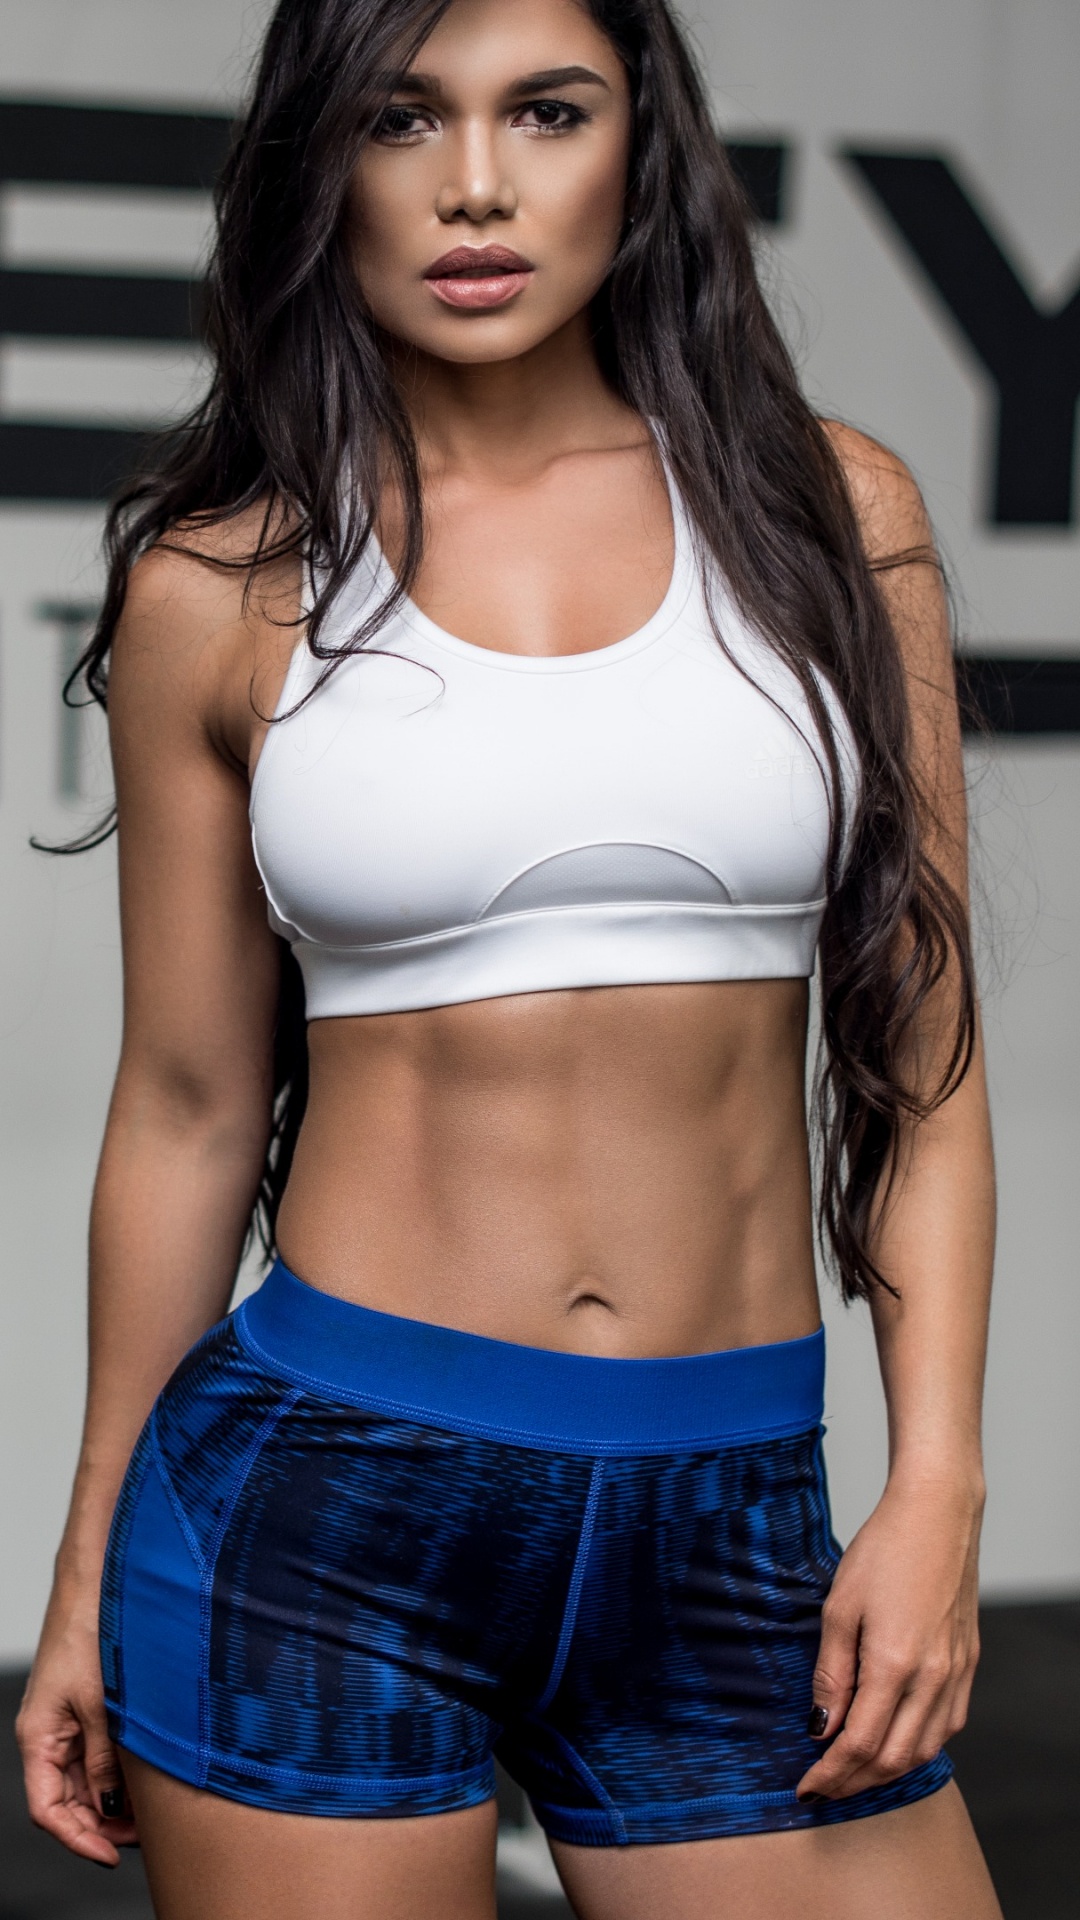 Woman in White Sports Bra and Blue Denim Shorts Standing Near White Wall. Wallpaper in 1080x1920 Resolution